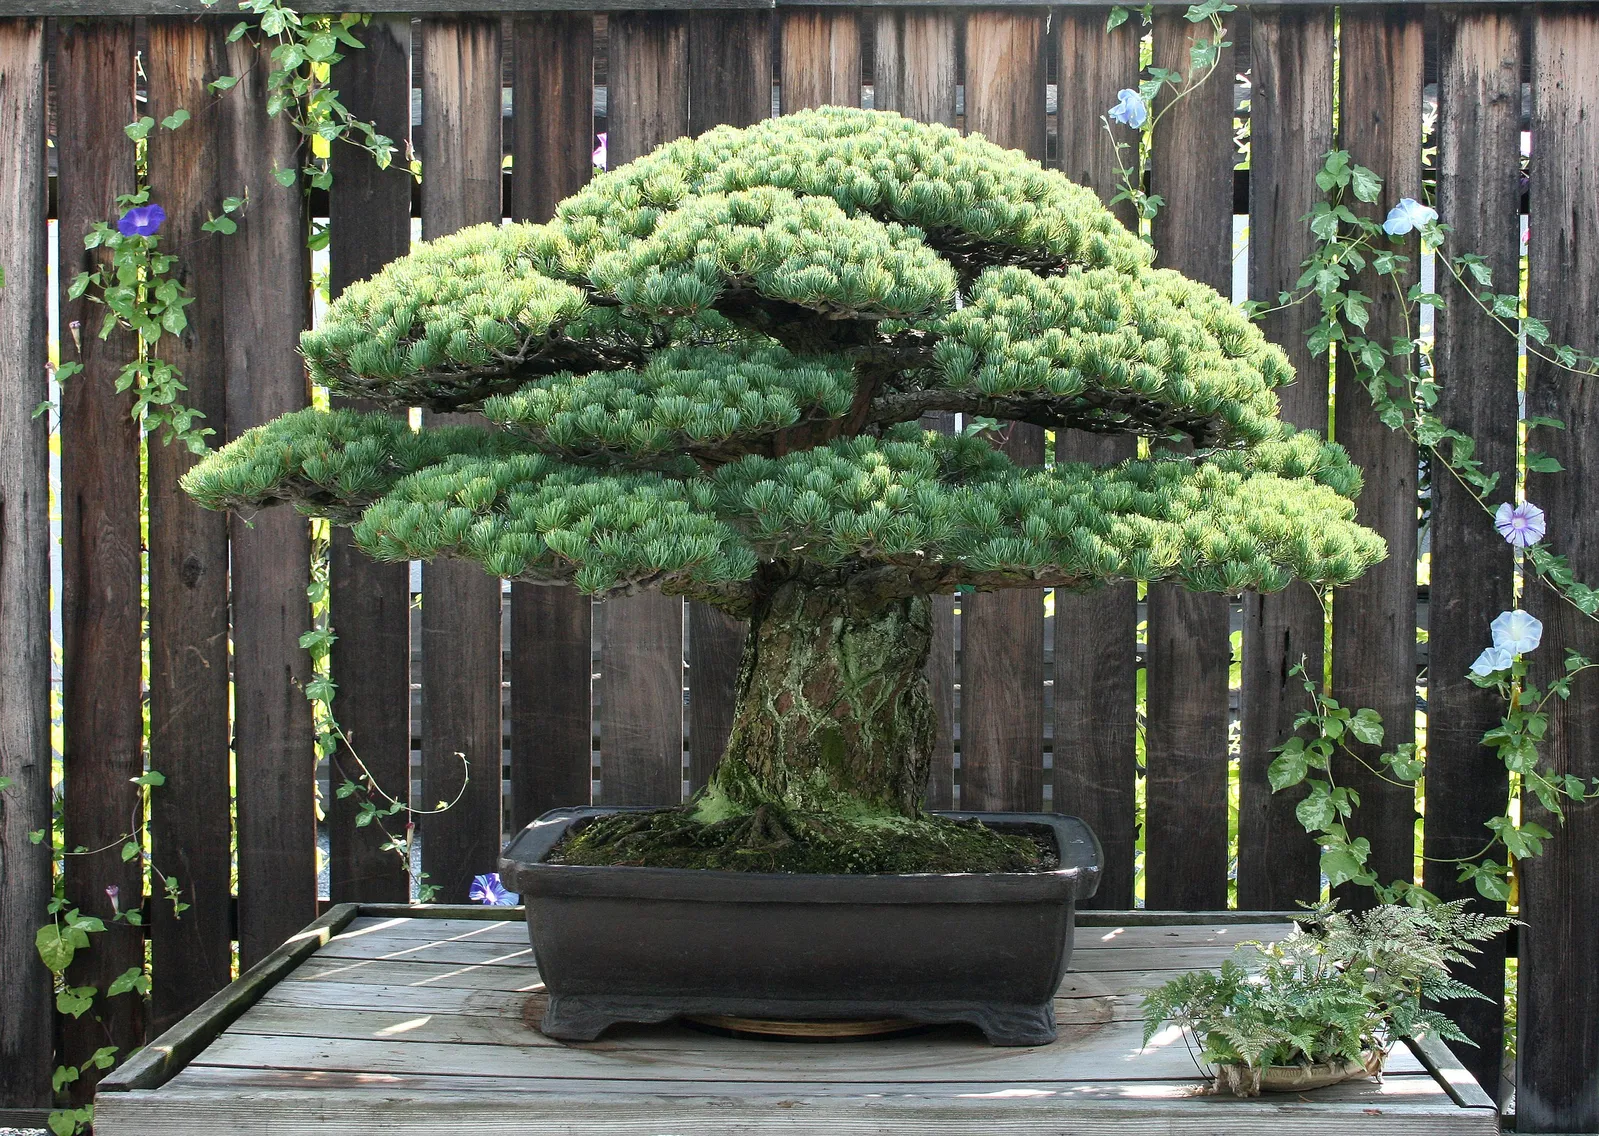 The Bonsai Tree That Survived the Bombing of Hiroshima